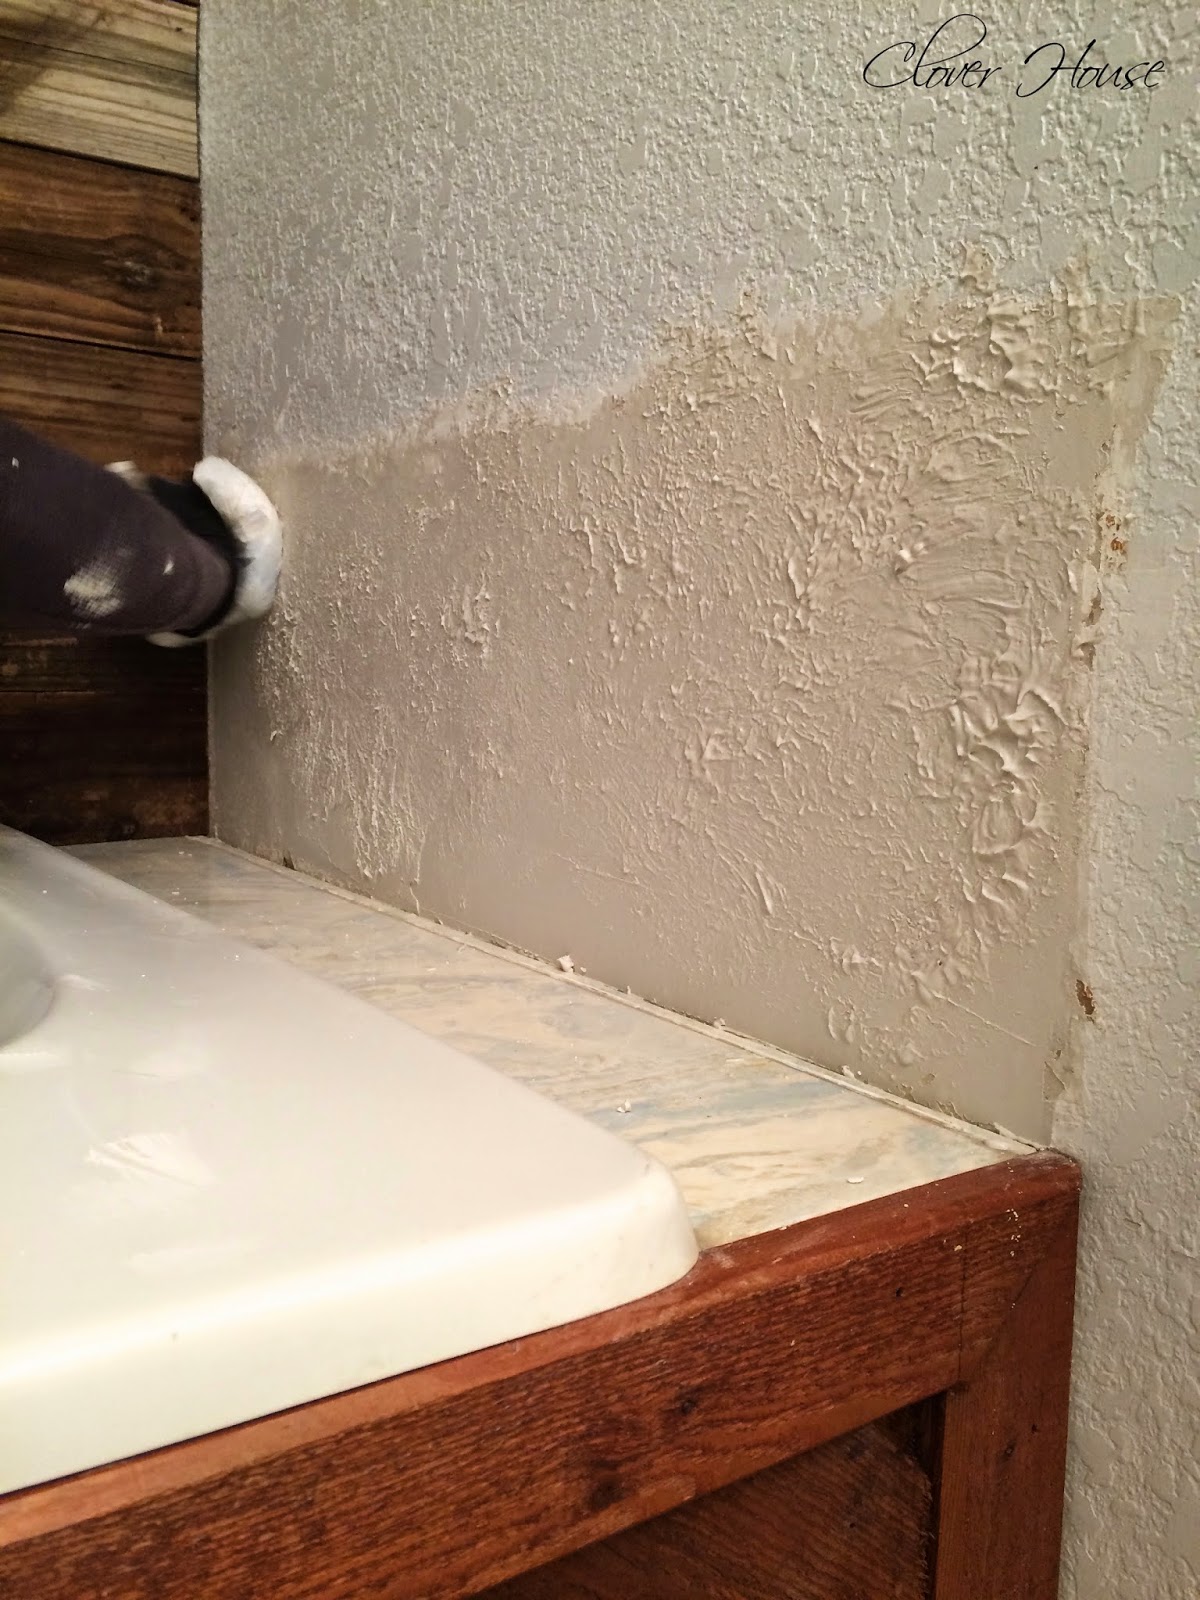 Clover House: Repairing Drywall and Adding Texture